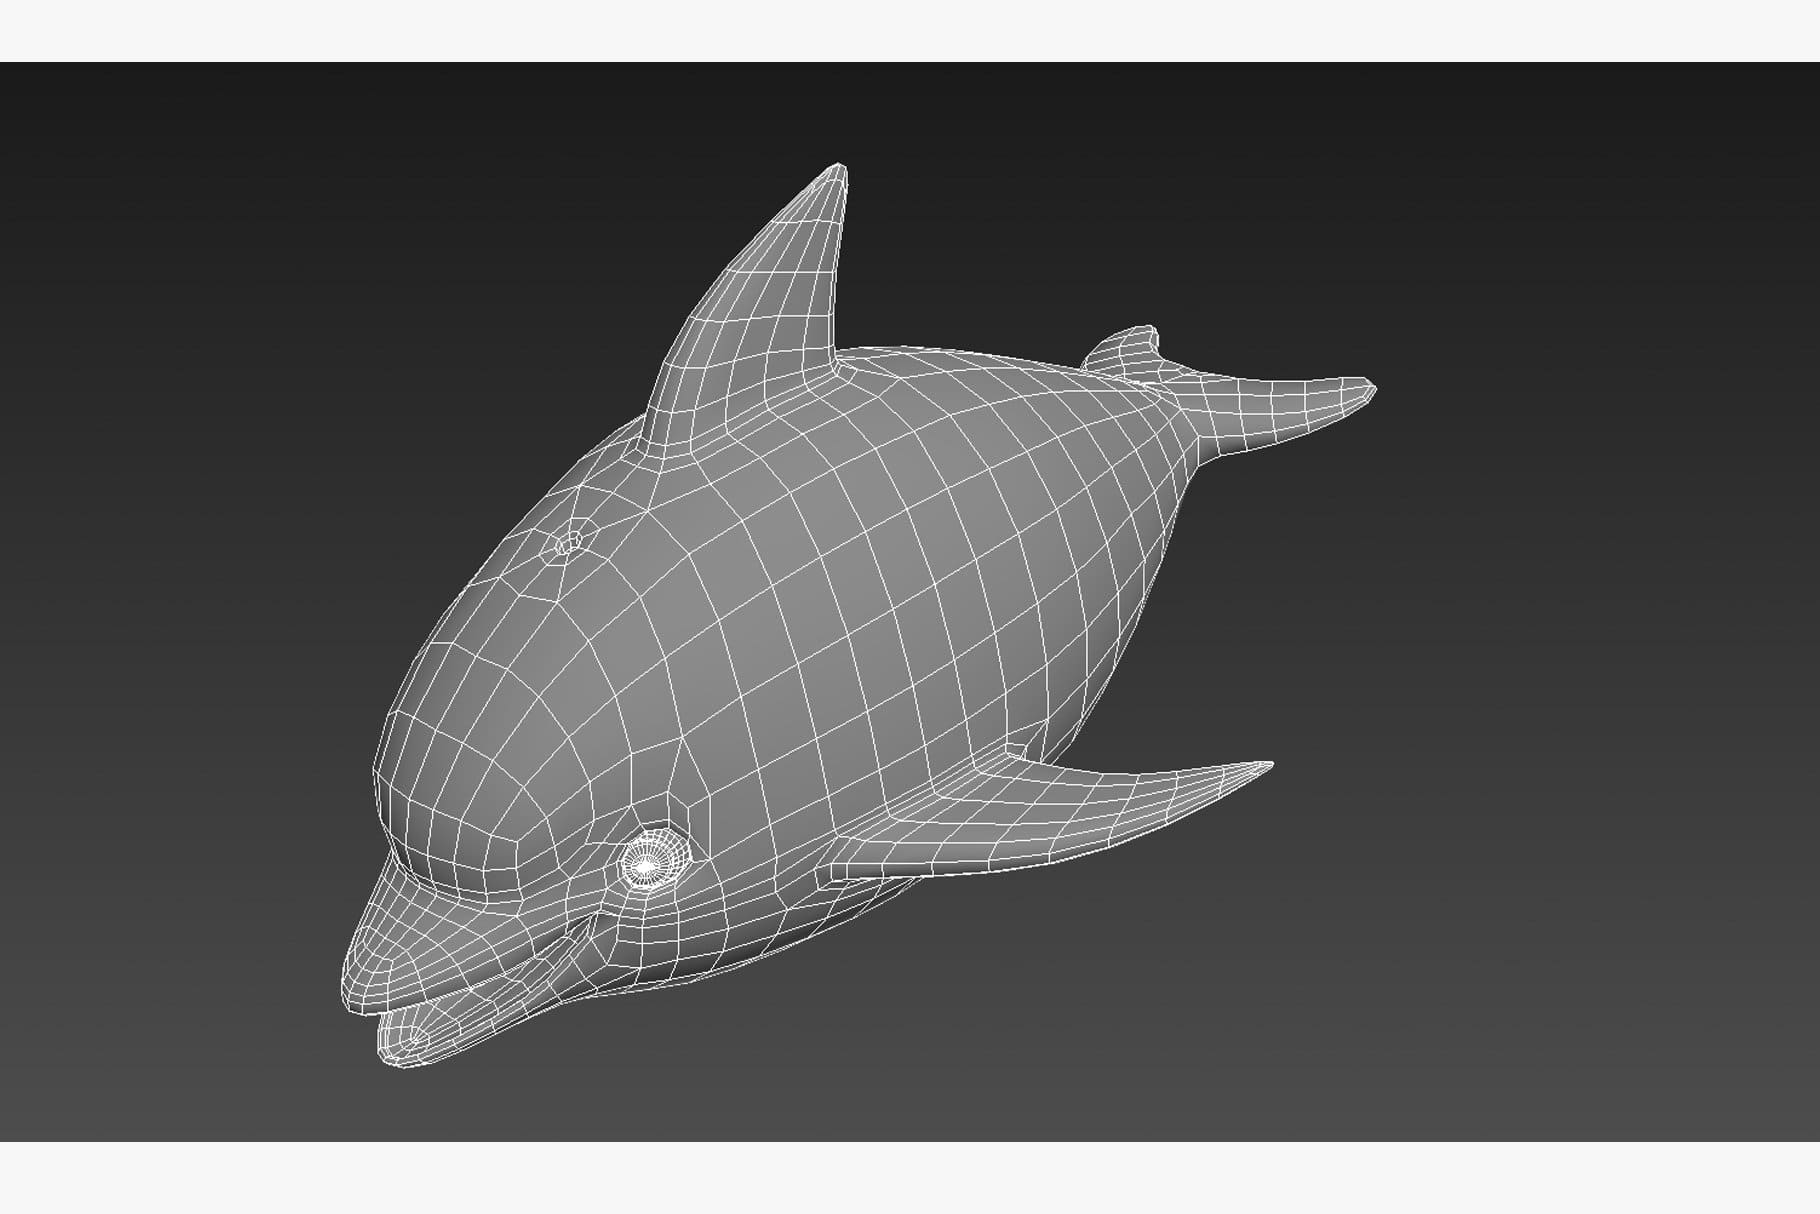 The dark model of the Dolphin is leaning forward.